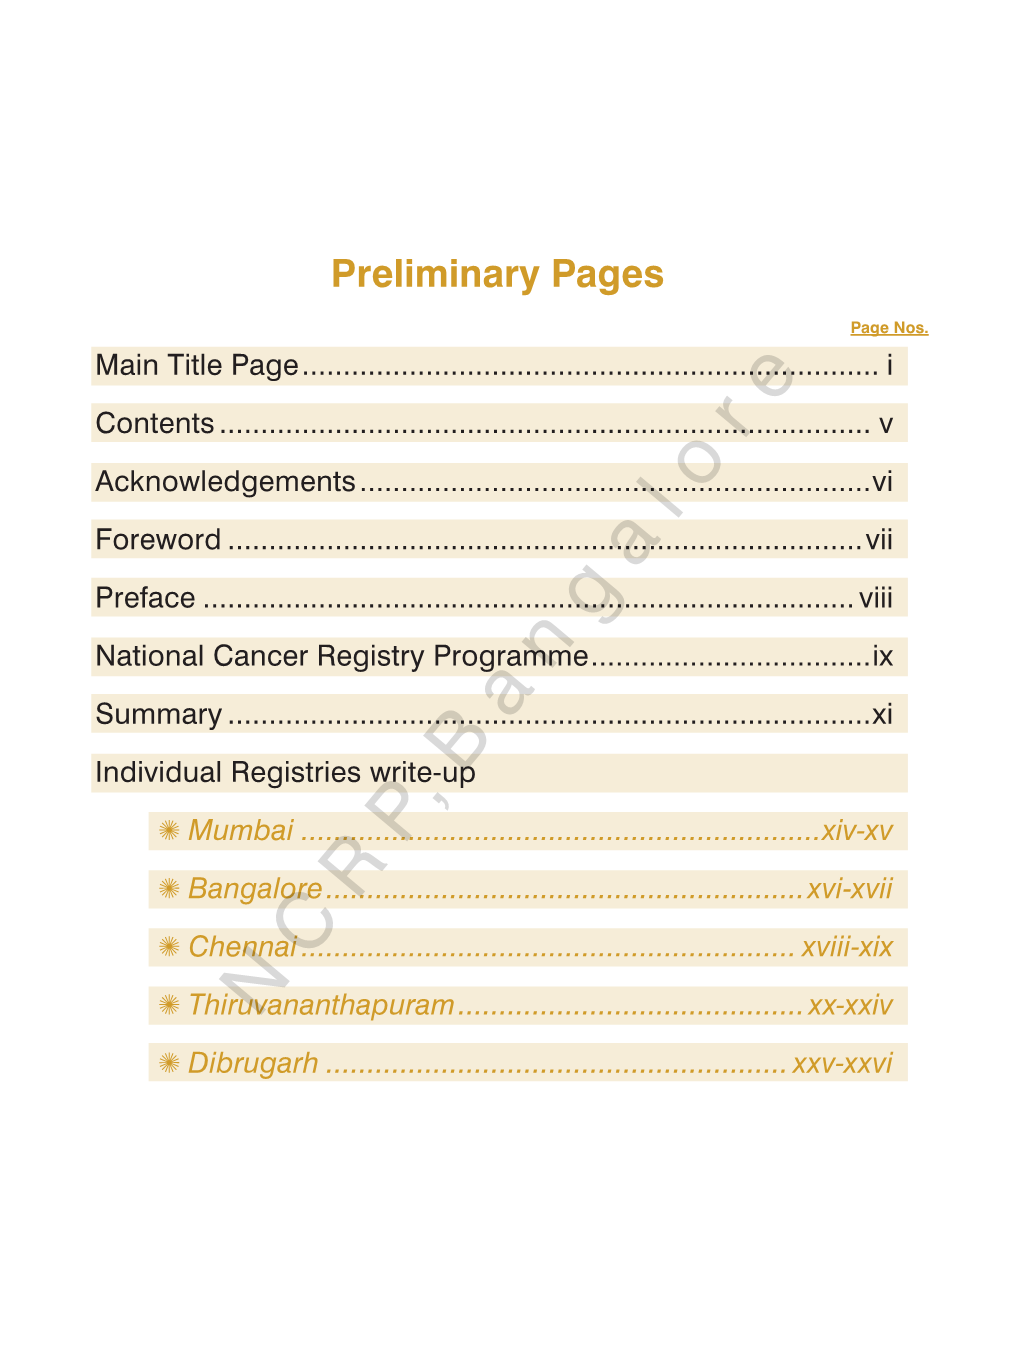 Consolidated Report of Hospital Based Cancer Registries 2004